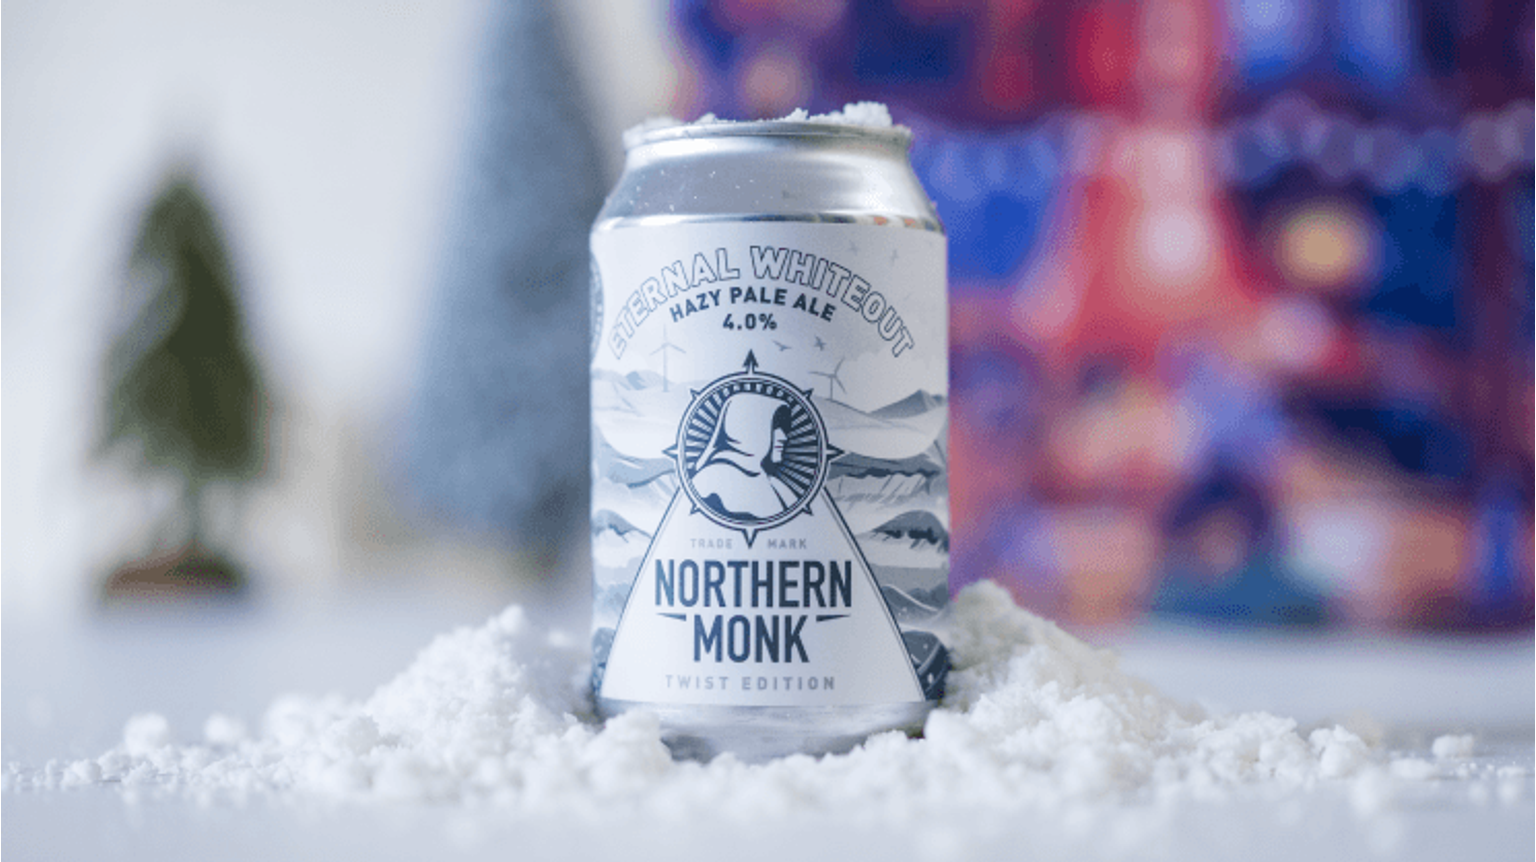 thumbnail for blog article named: Beery Christmas Jour 2 : Northern Monk Eternal Whiteout